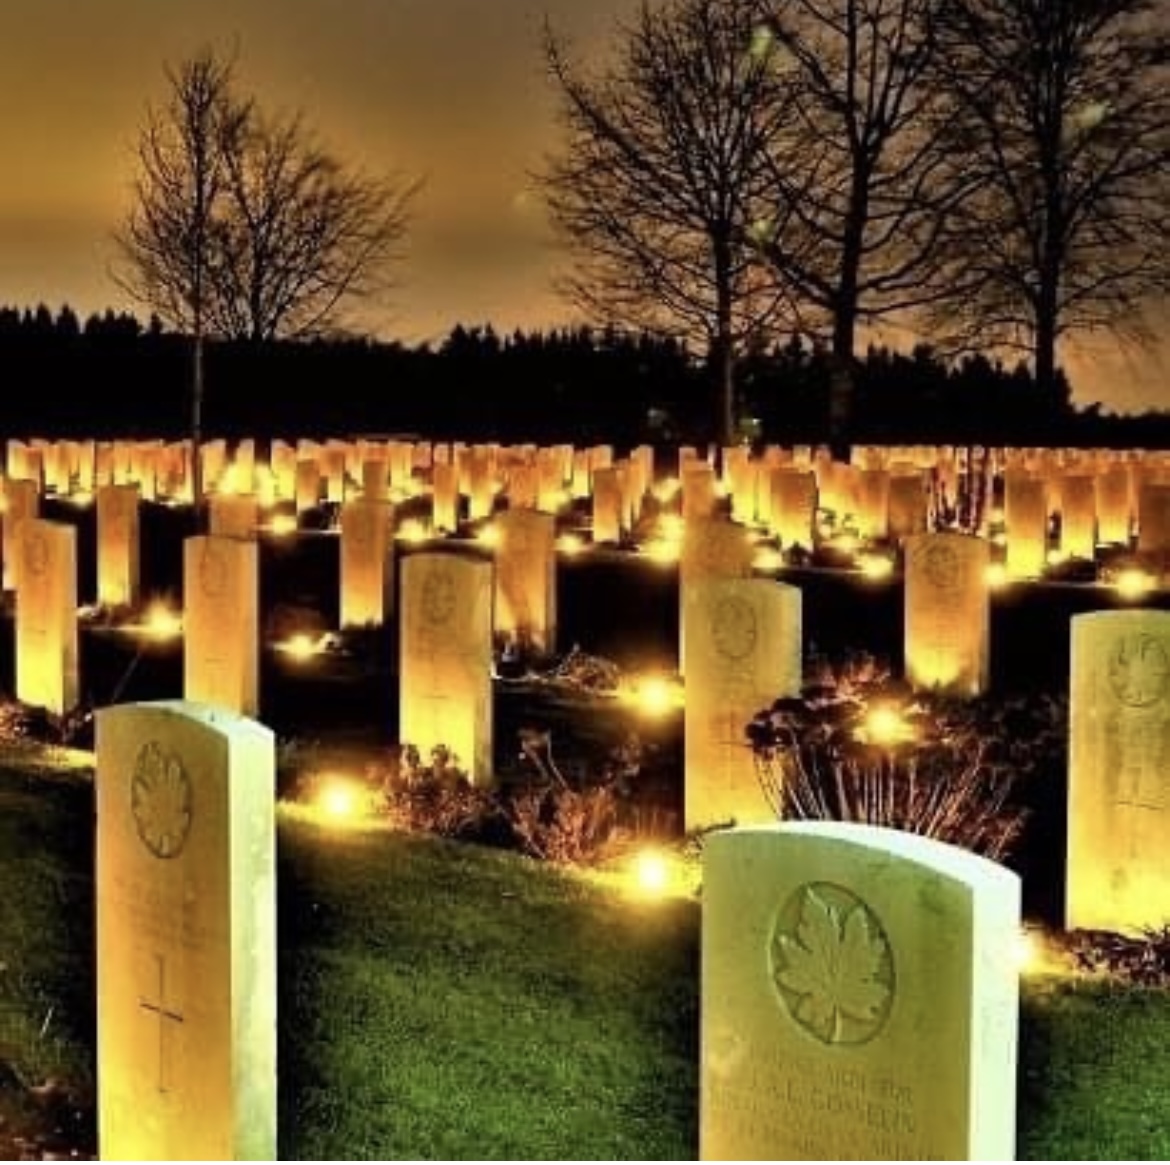 Every Christmas Eve local school children come to Holten and Groesbeek Canadian Military Cemeteries in the Netherlands to light a candle in honour of each soldier laid to rest. The act is both humbling and beautiful and serves as reminder to be grateful for the peace we enjoy.